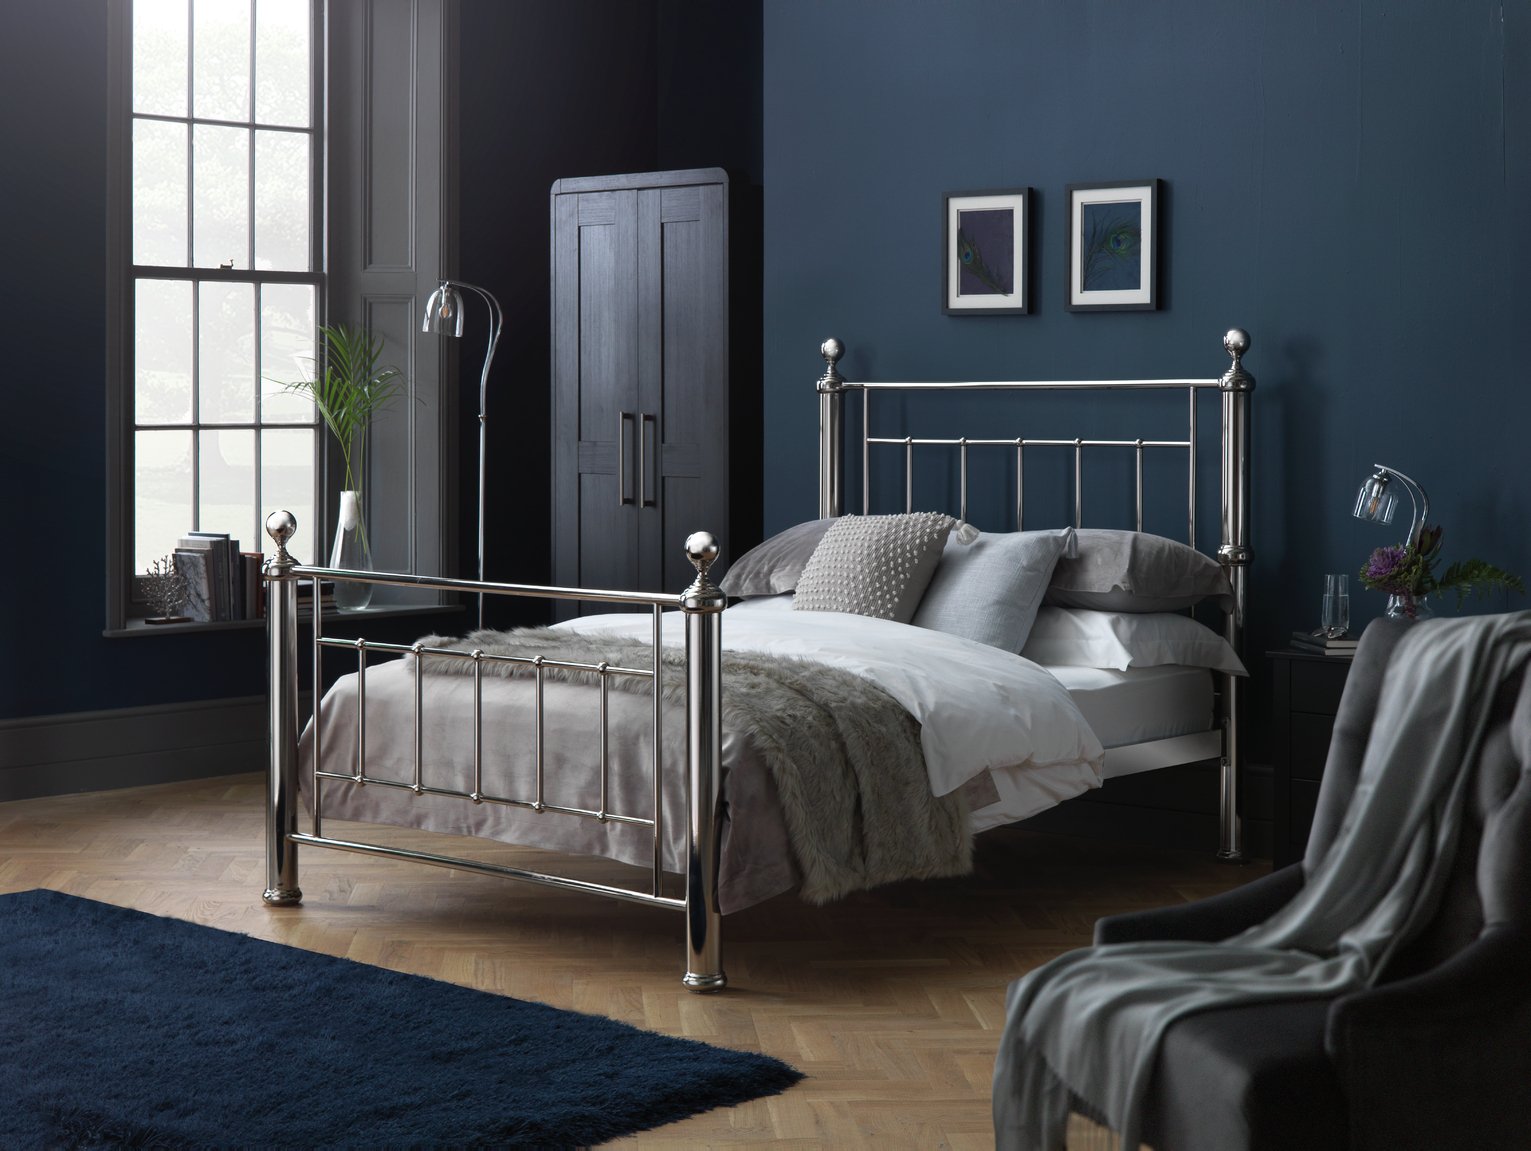 Argos Home Mayfair Superking Bed Frame Review